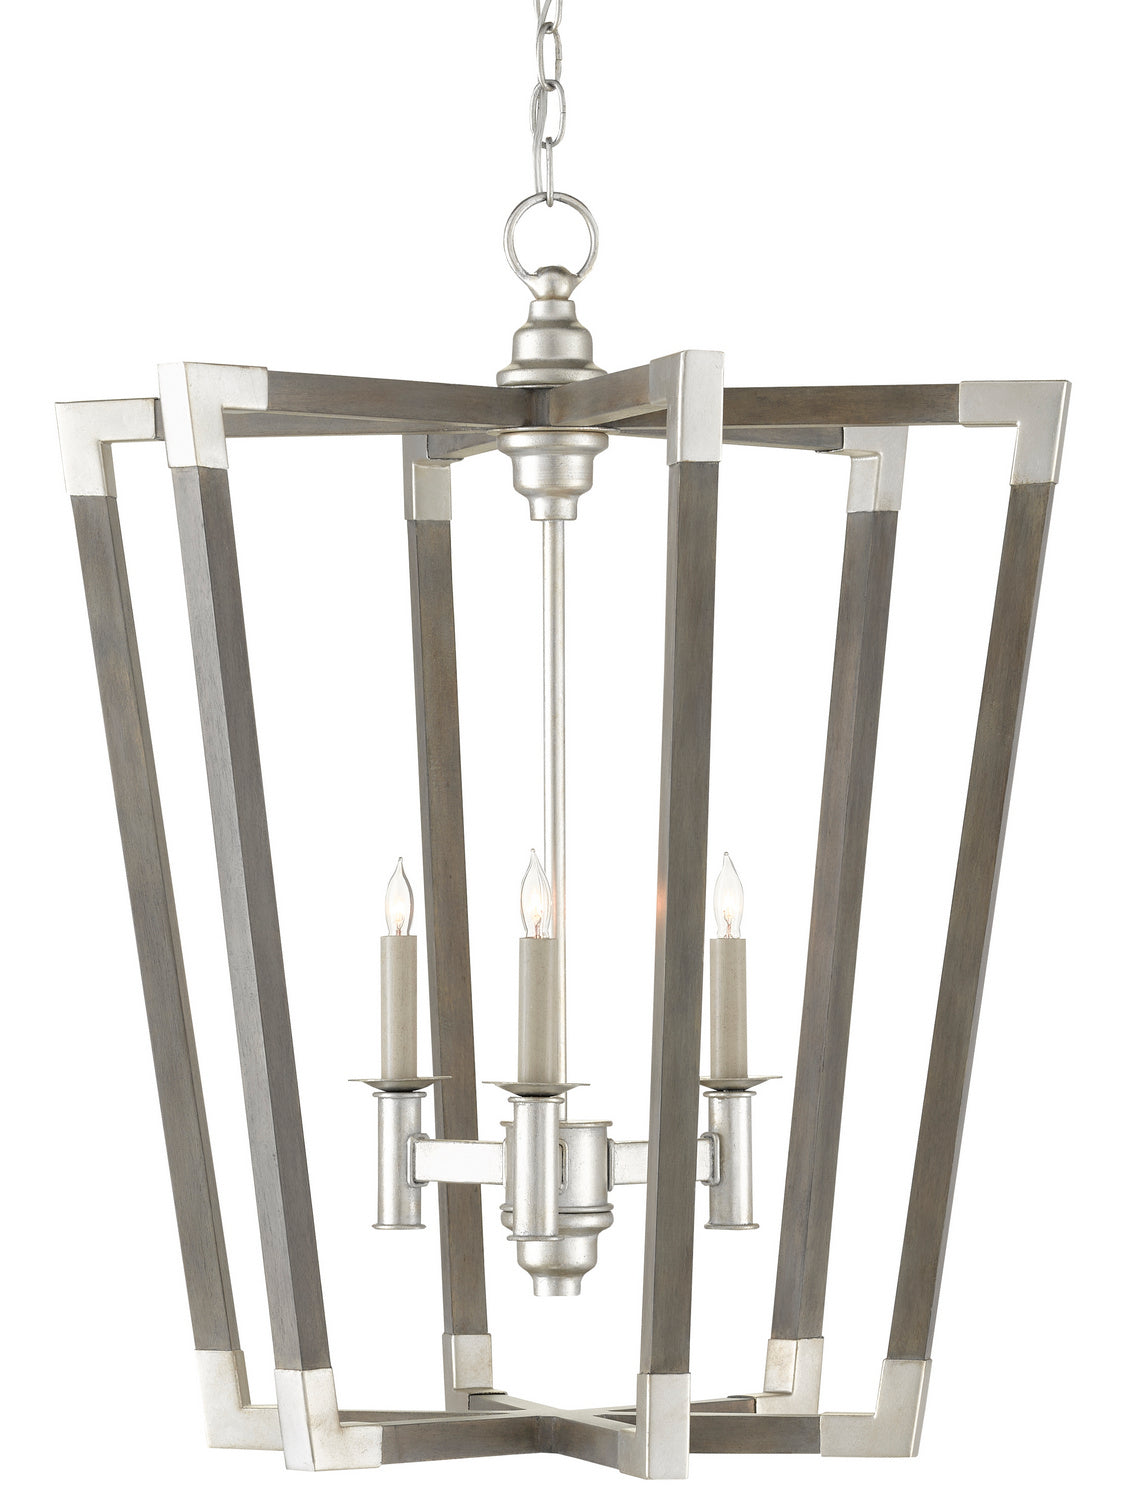 Three Light Chandelier from the Bastian collection in Chateau Gray/Contemporary Silver Leaf finish